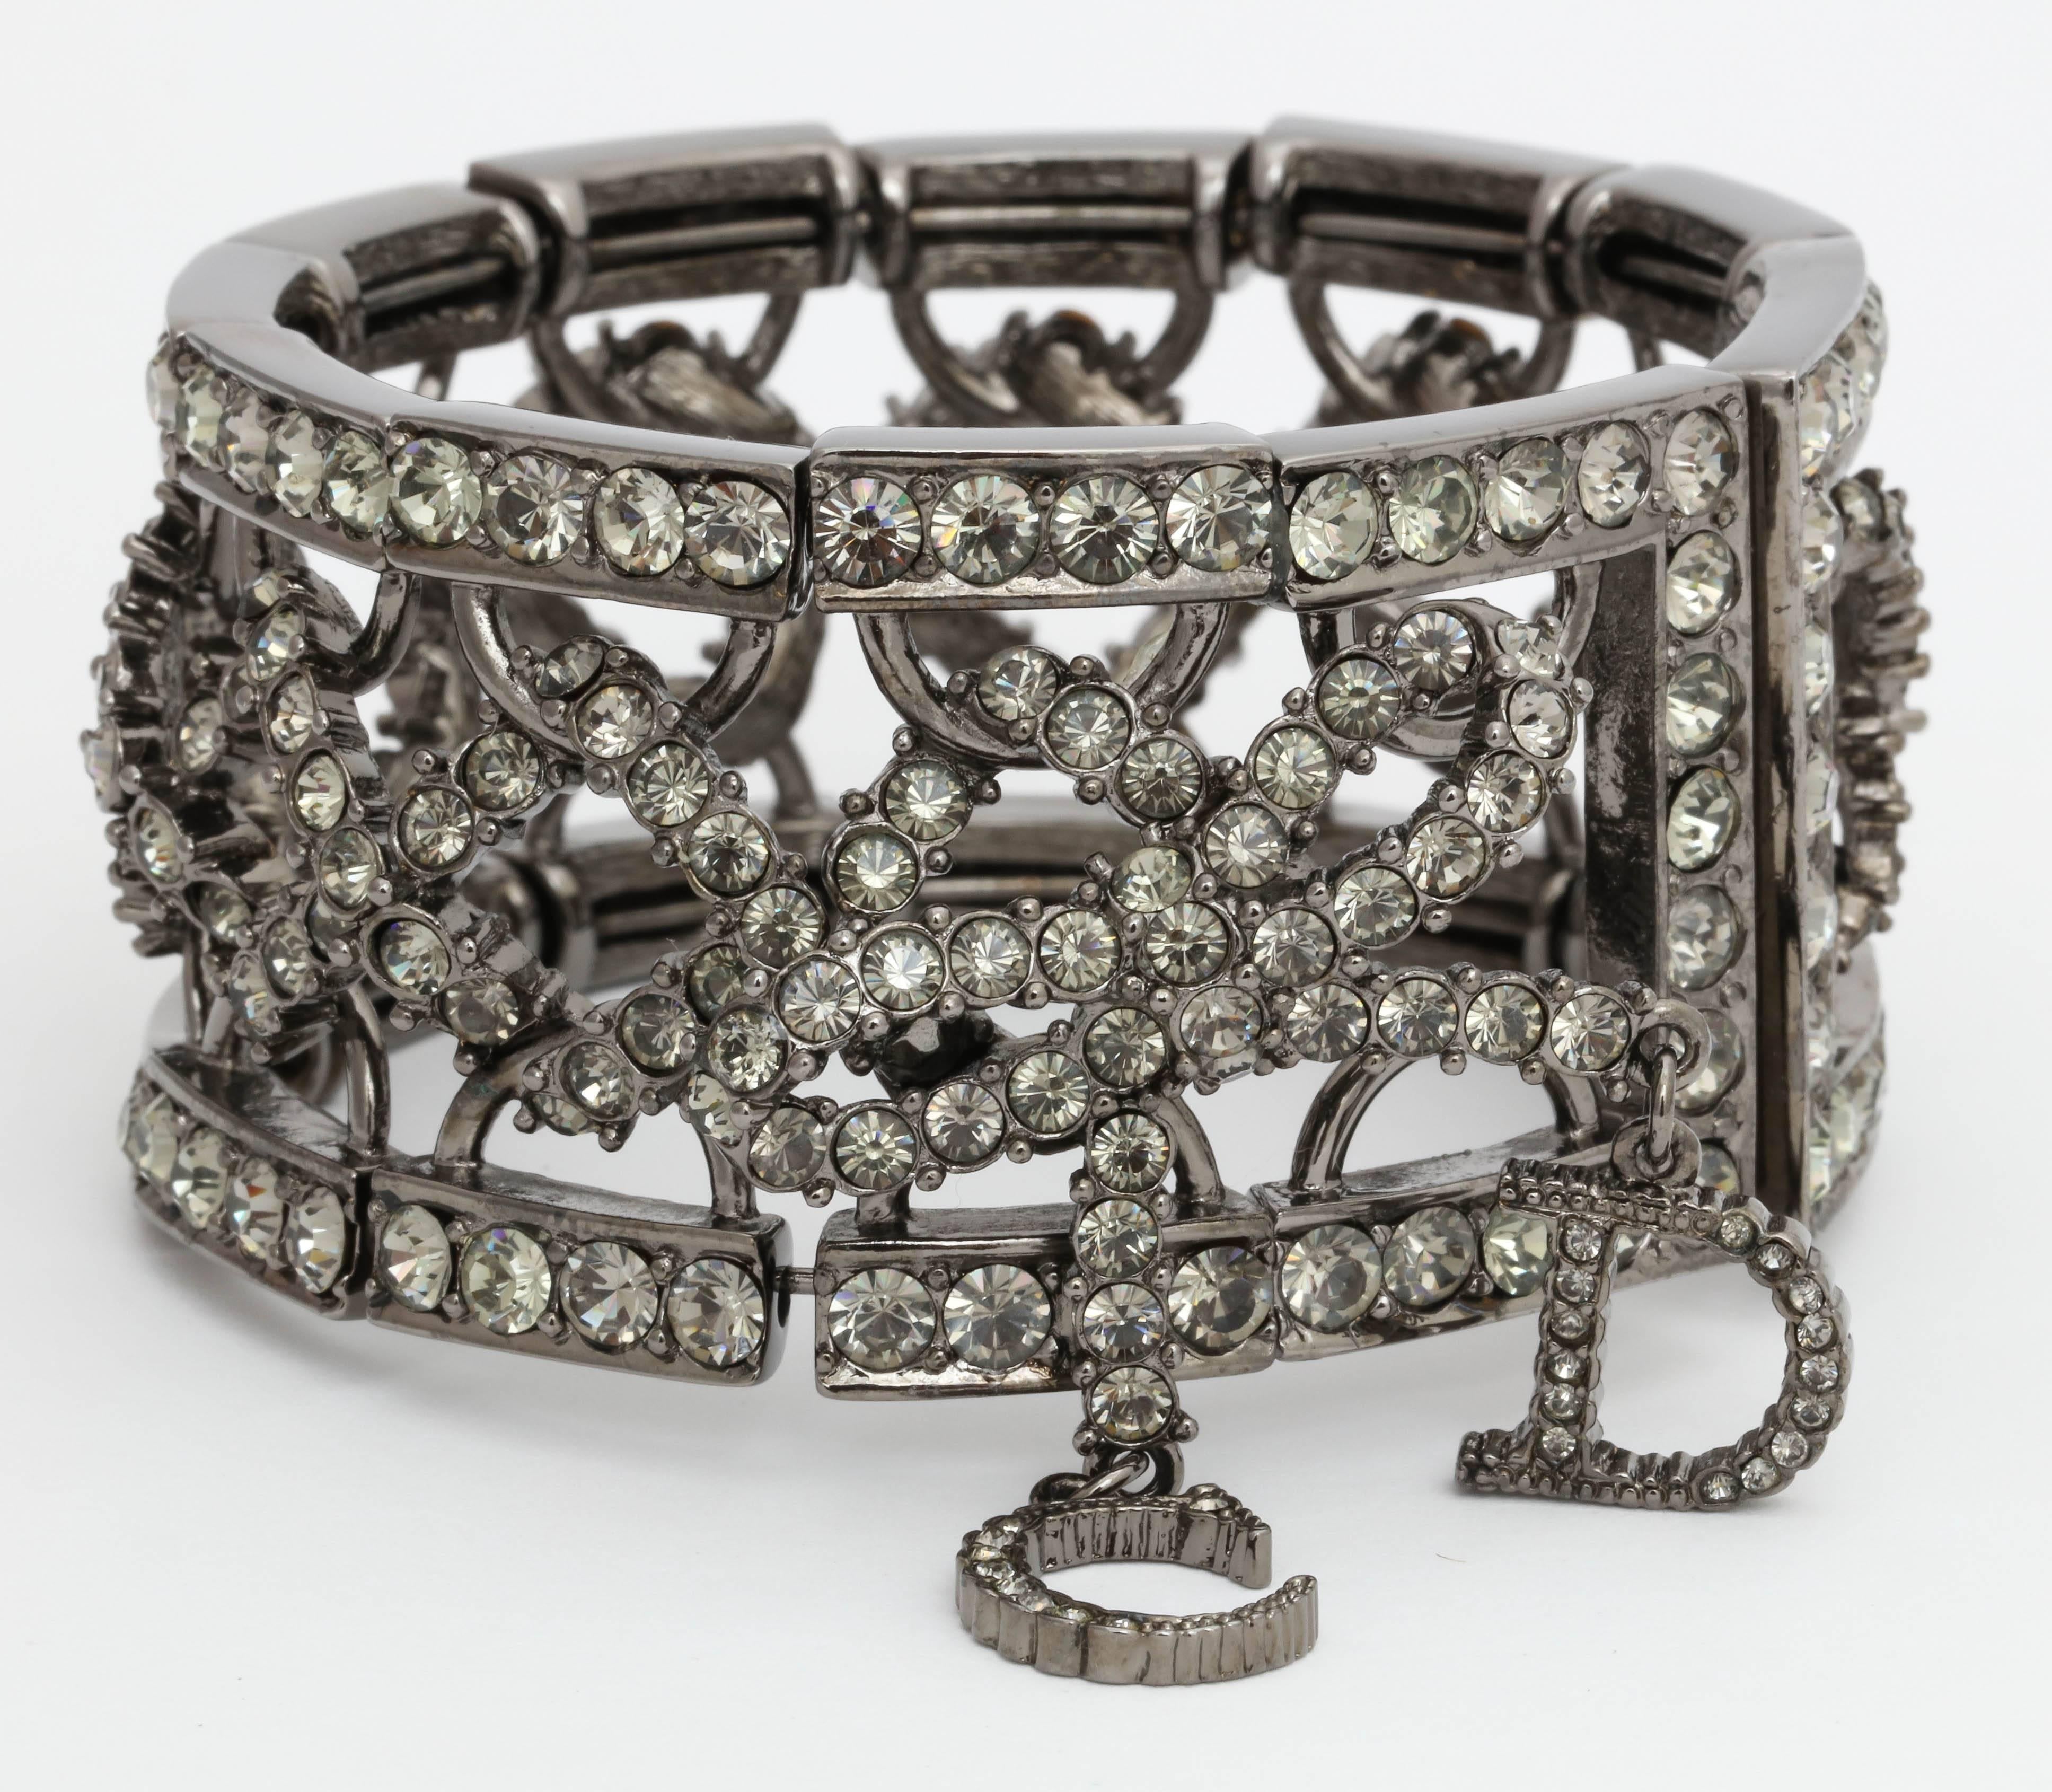 Beautiful Christian Dior by John Galliano bangle with bow and rhinestones.
Adjustable, one size fits all.